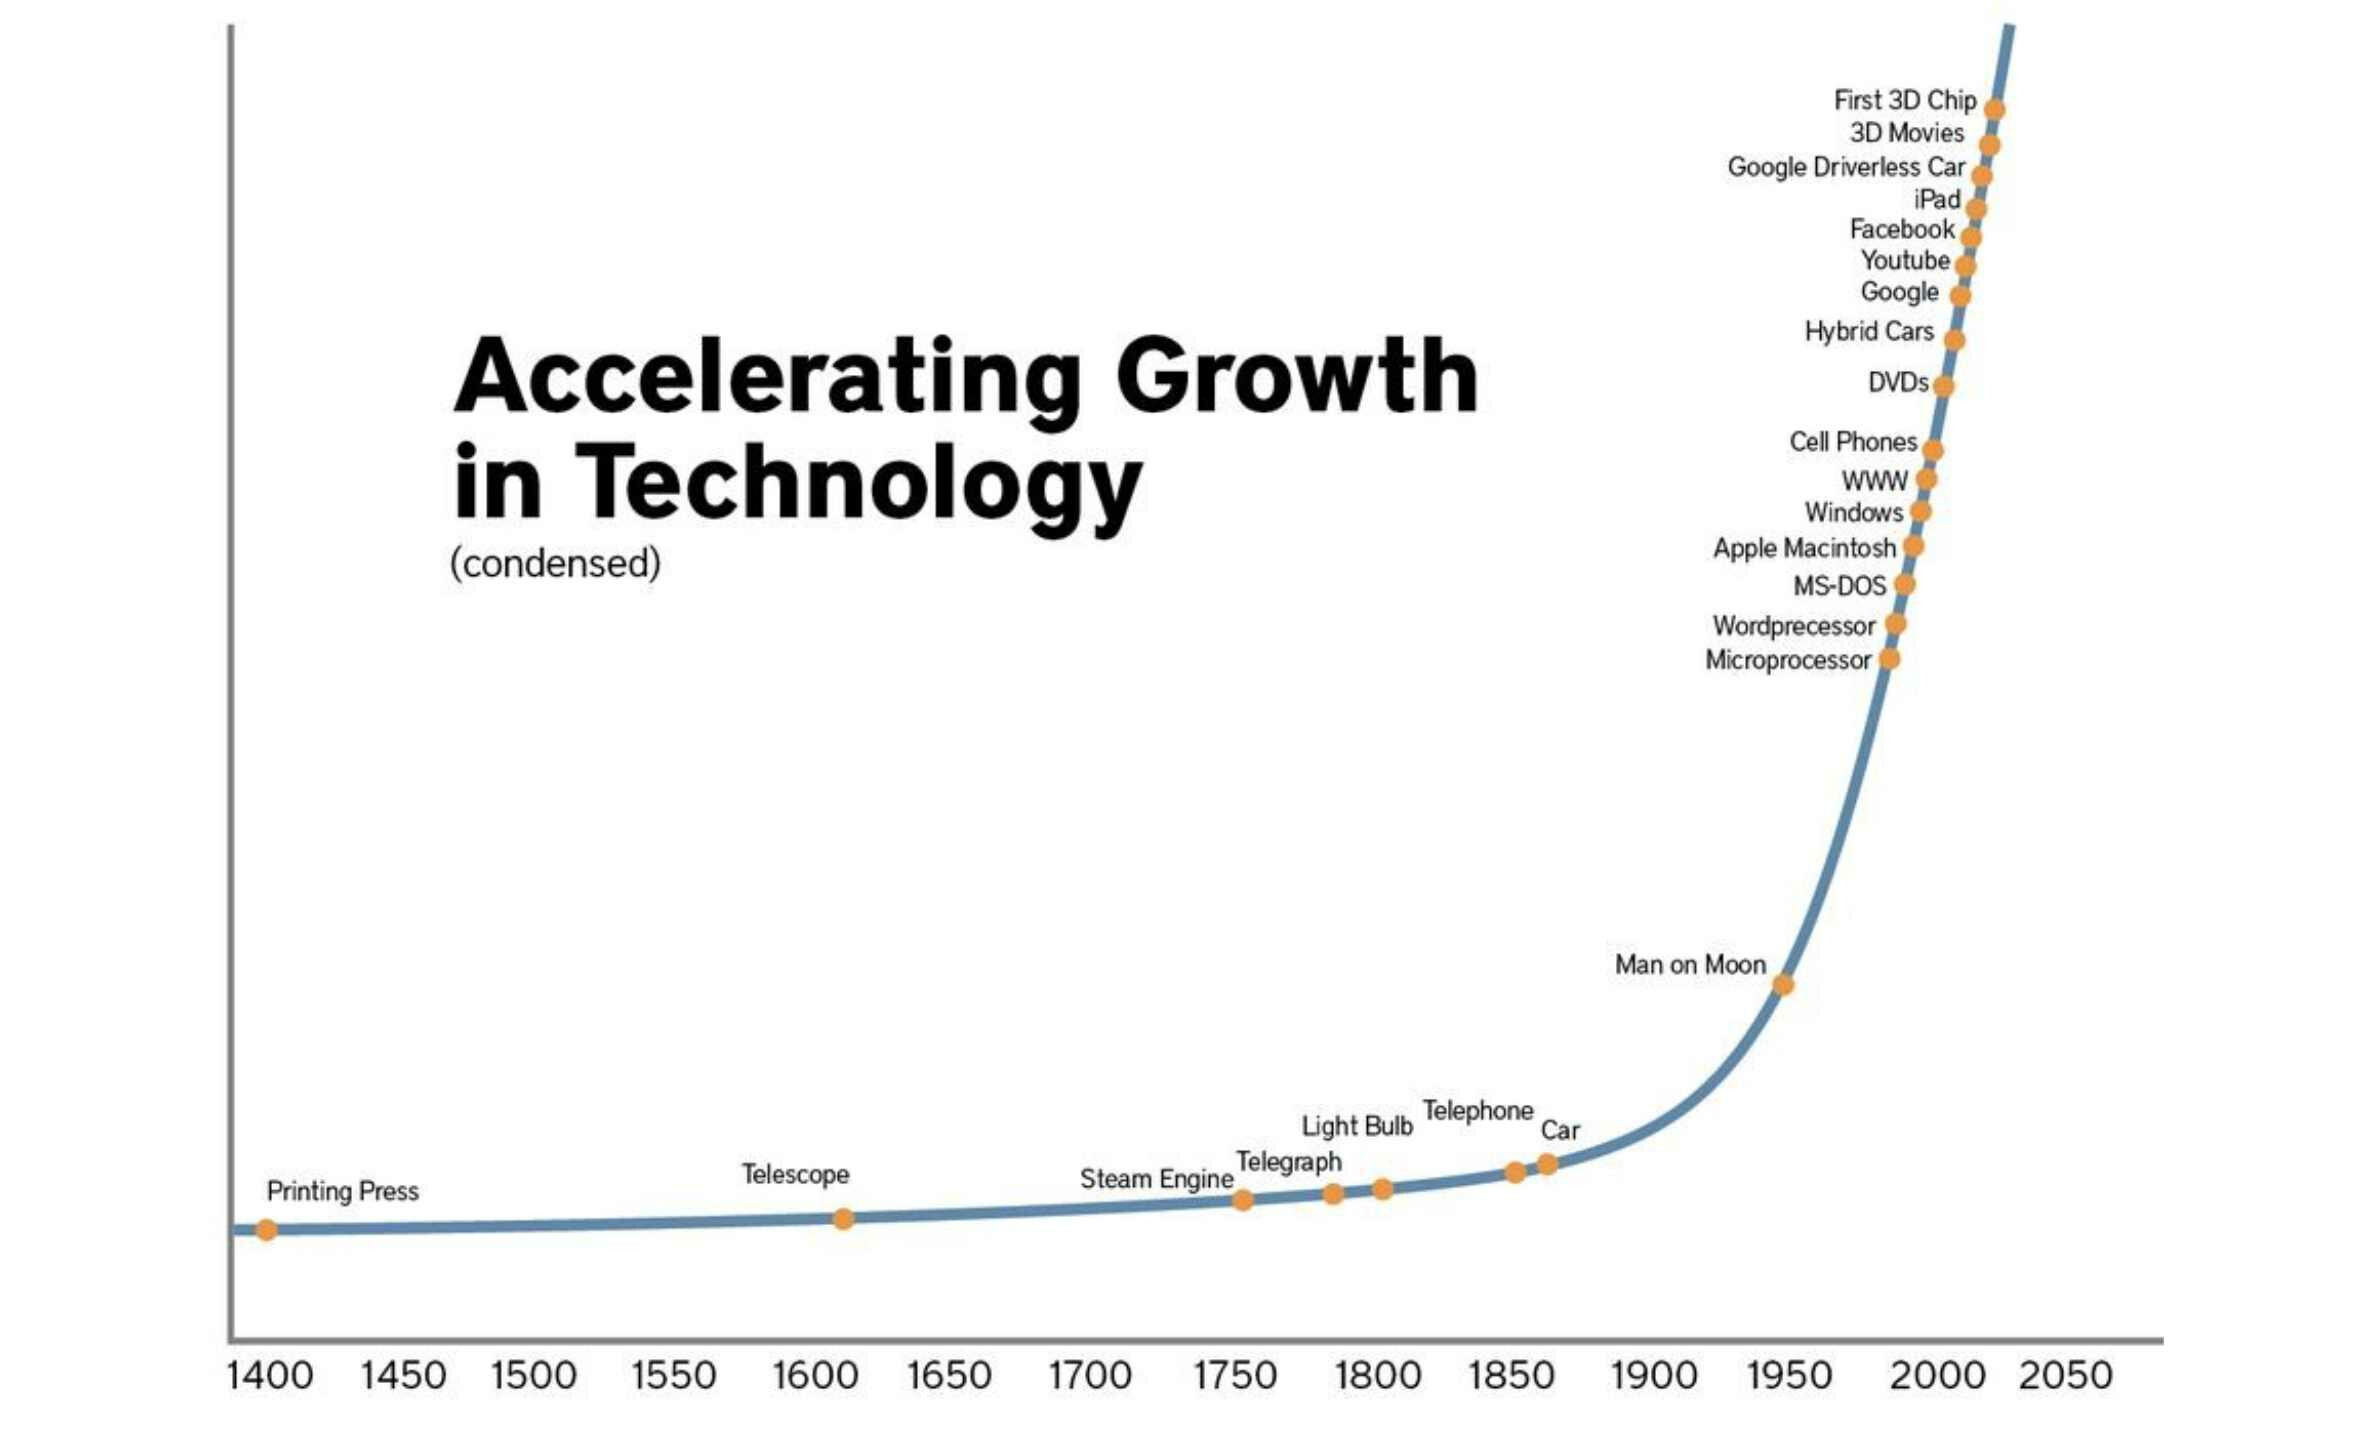 Accelerating growth in technology